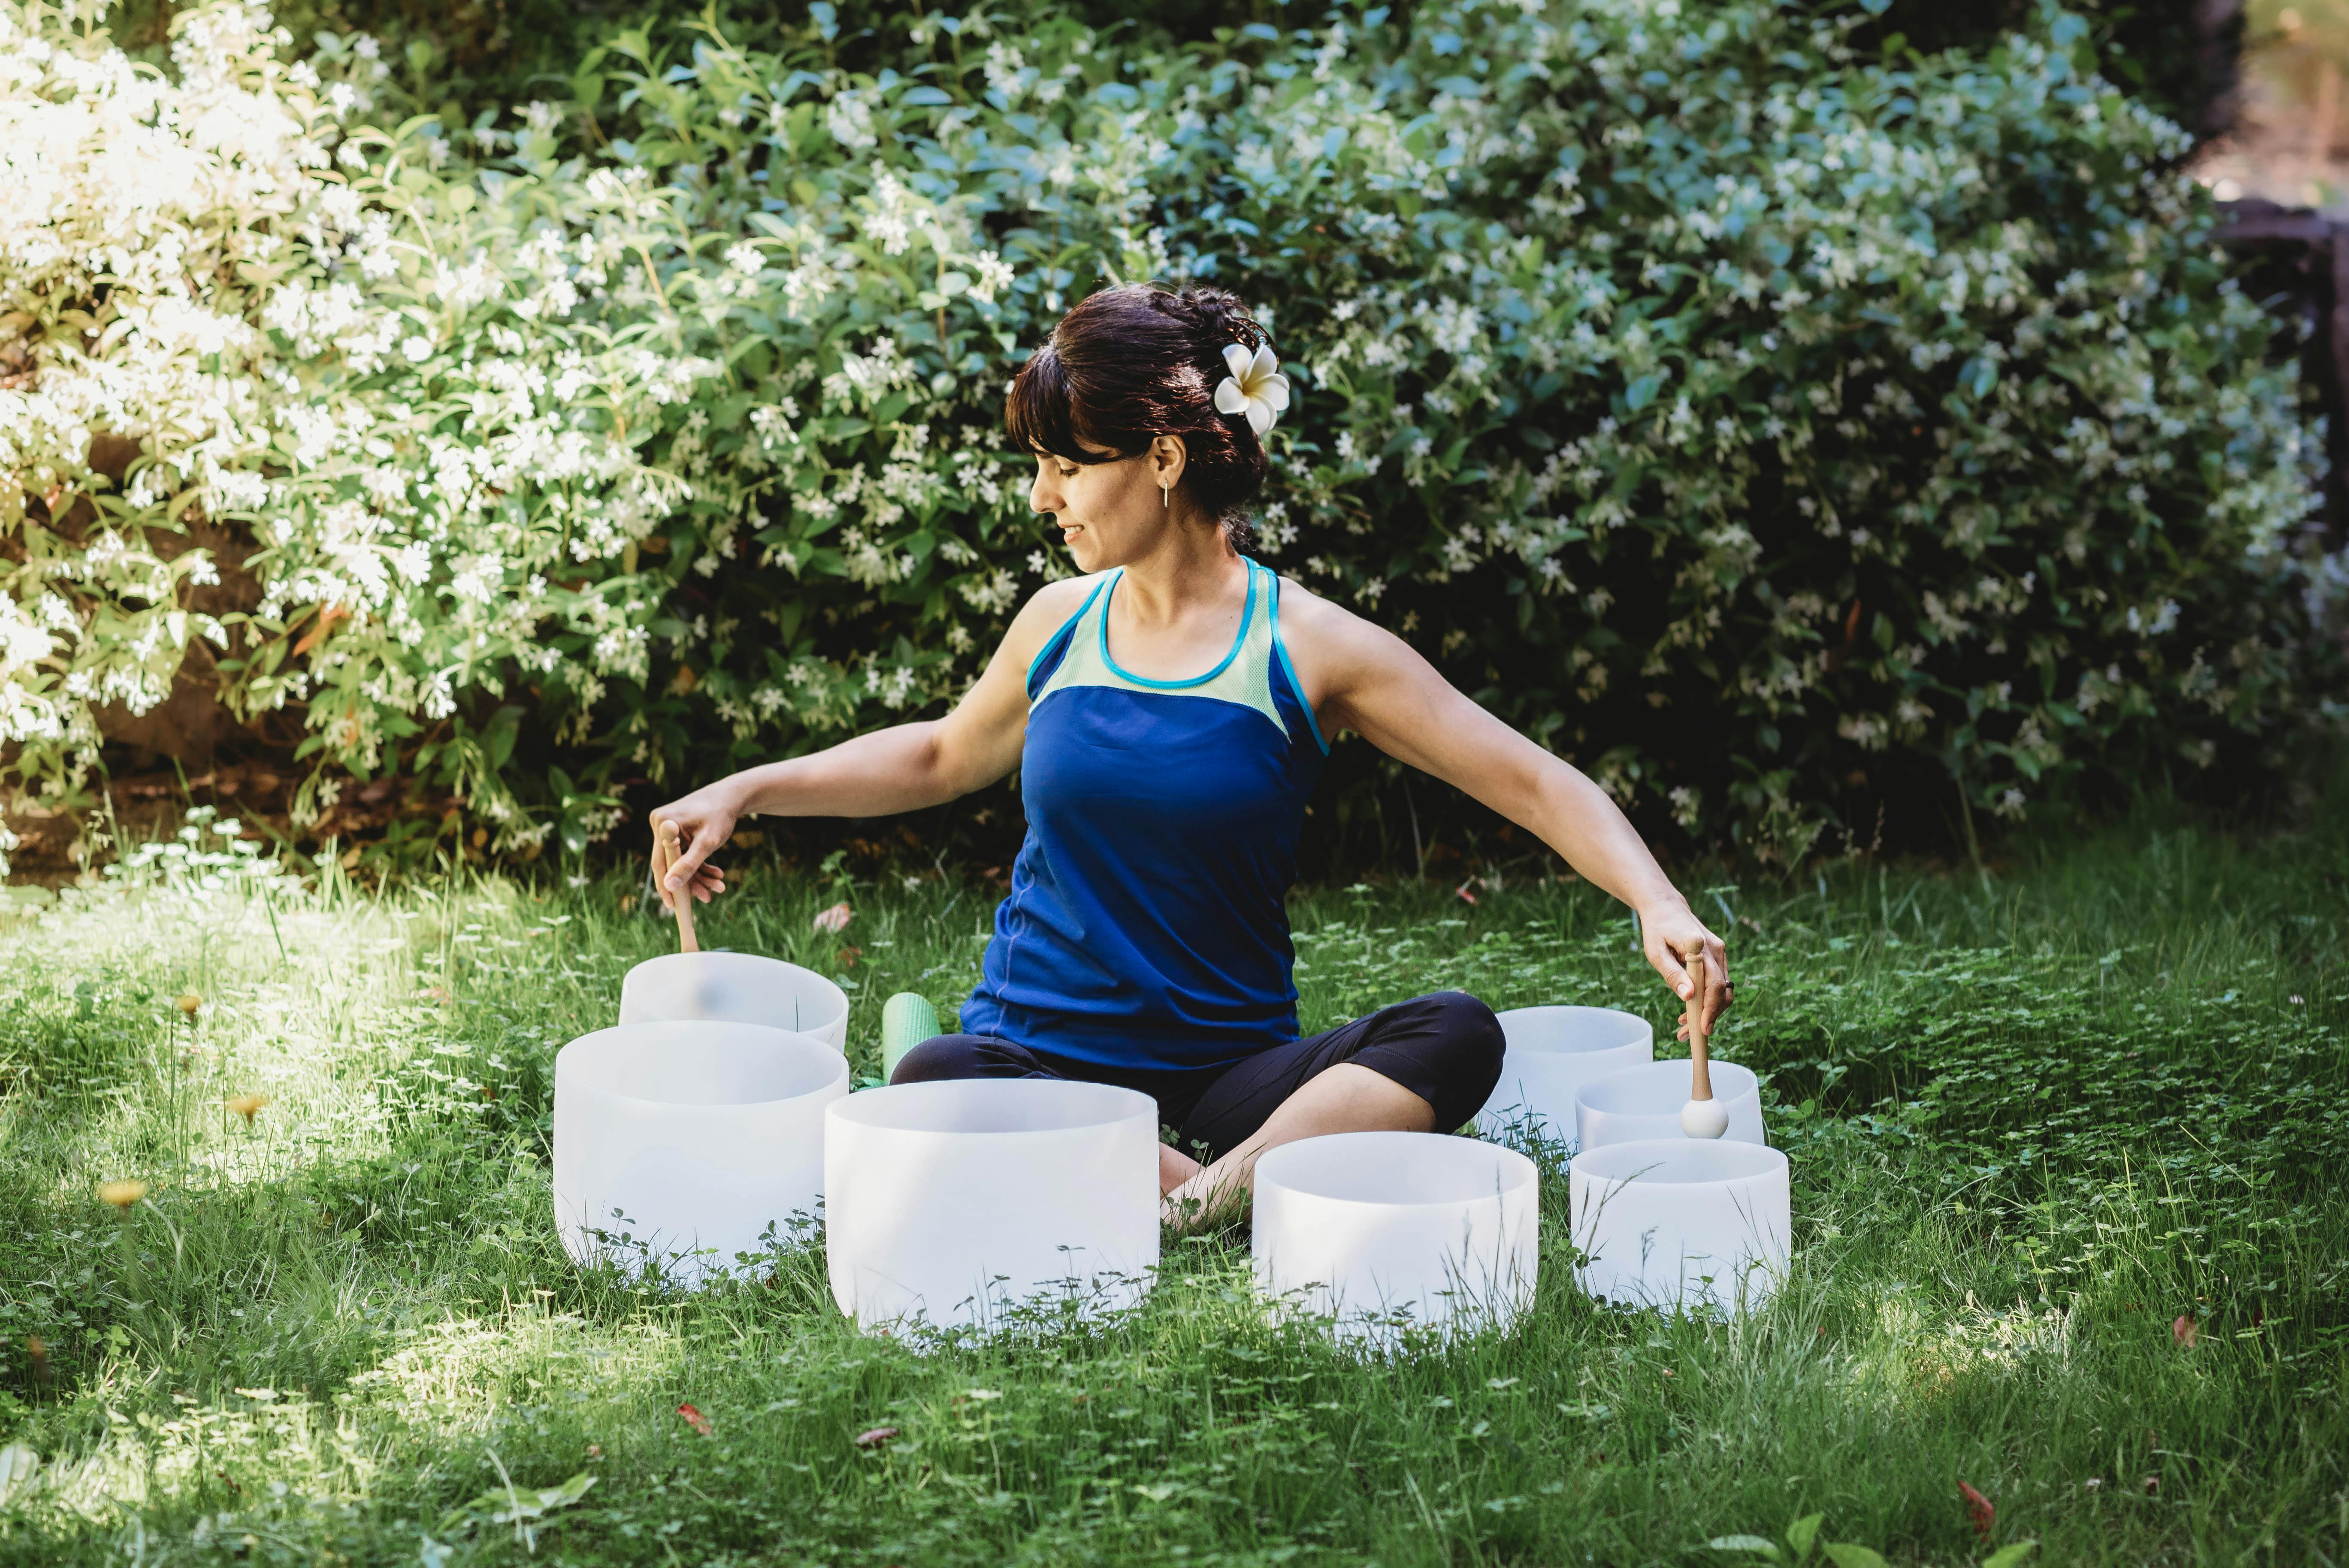 Woman playing crystal bowls while sitting in the grass in front of a set of jasmin bushes that are in bloom.